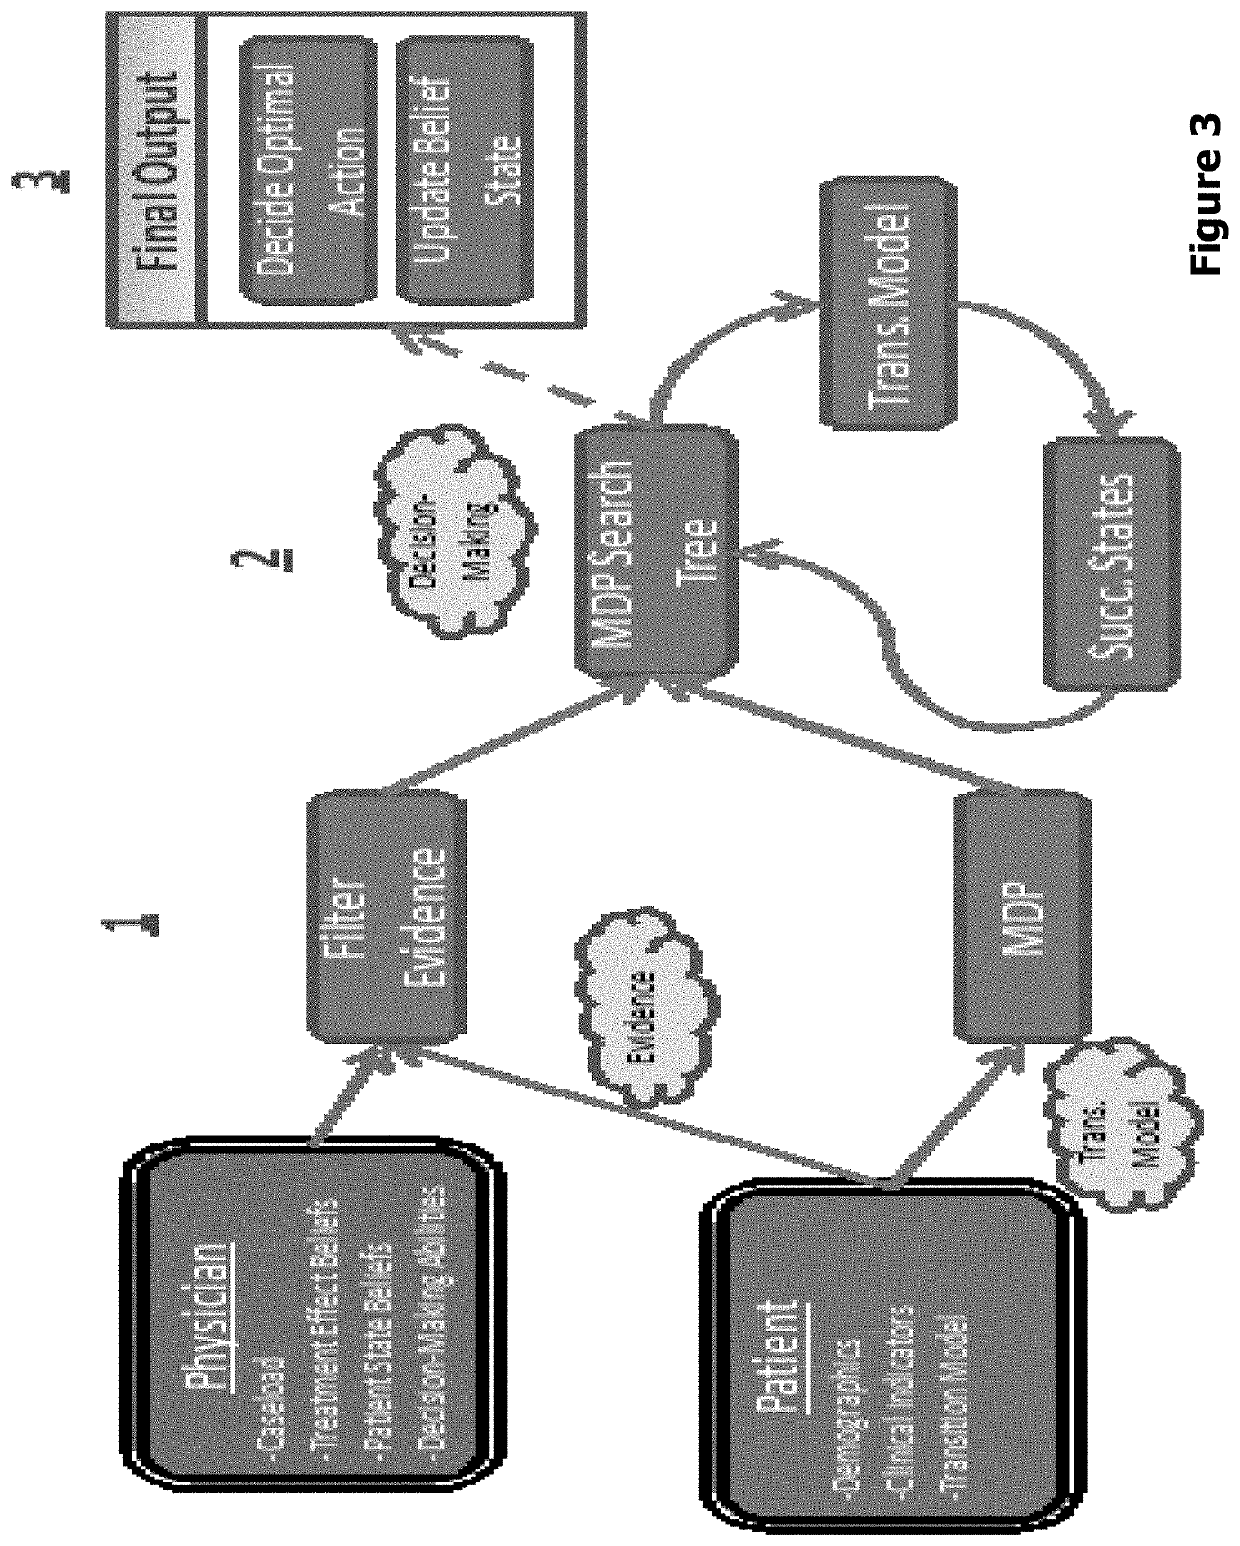 Clinical decision-making artificial intelligence object oriented system and method